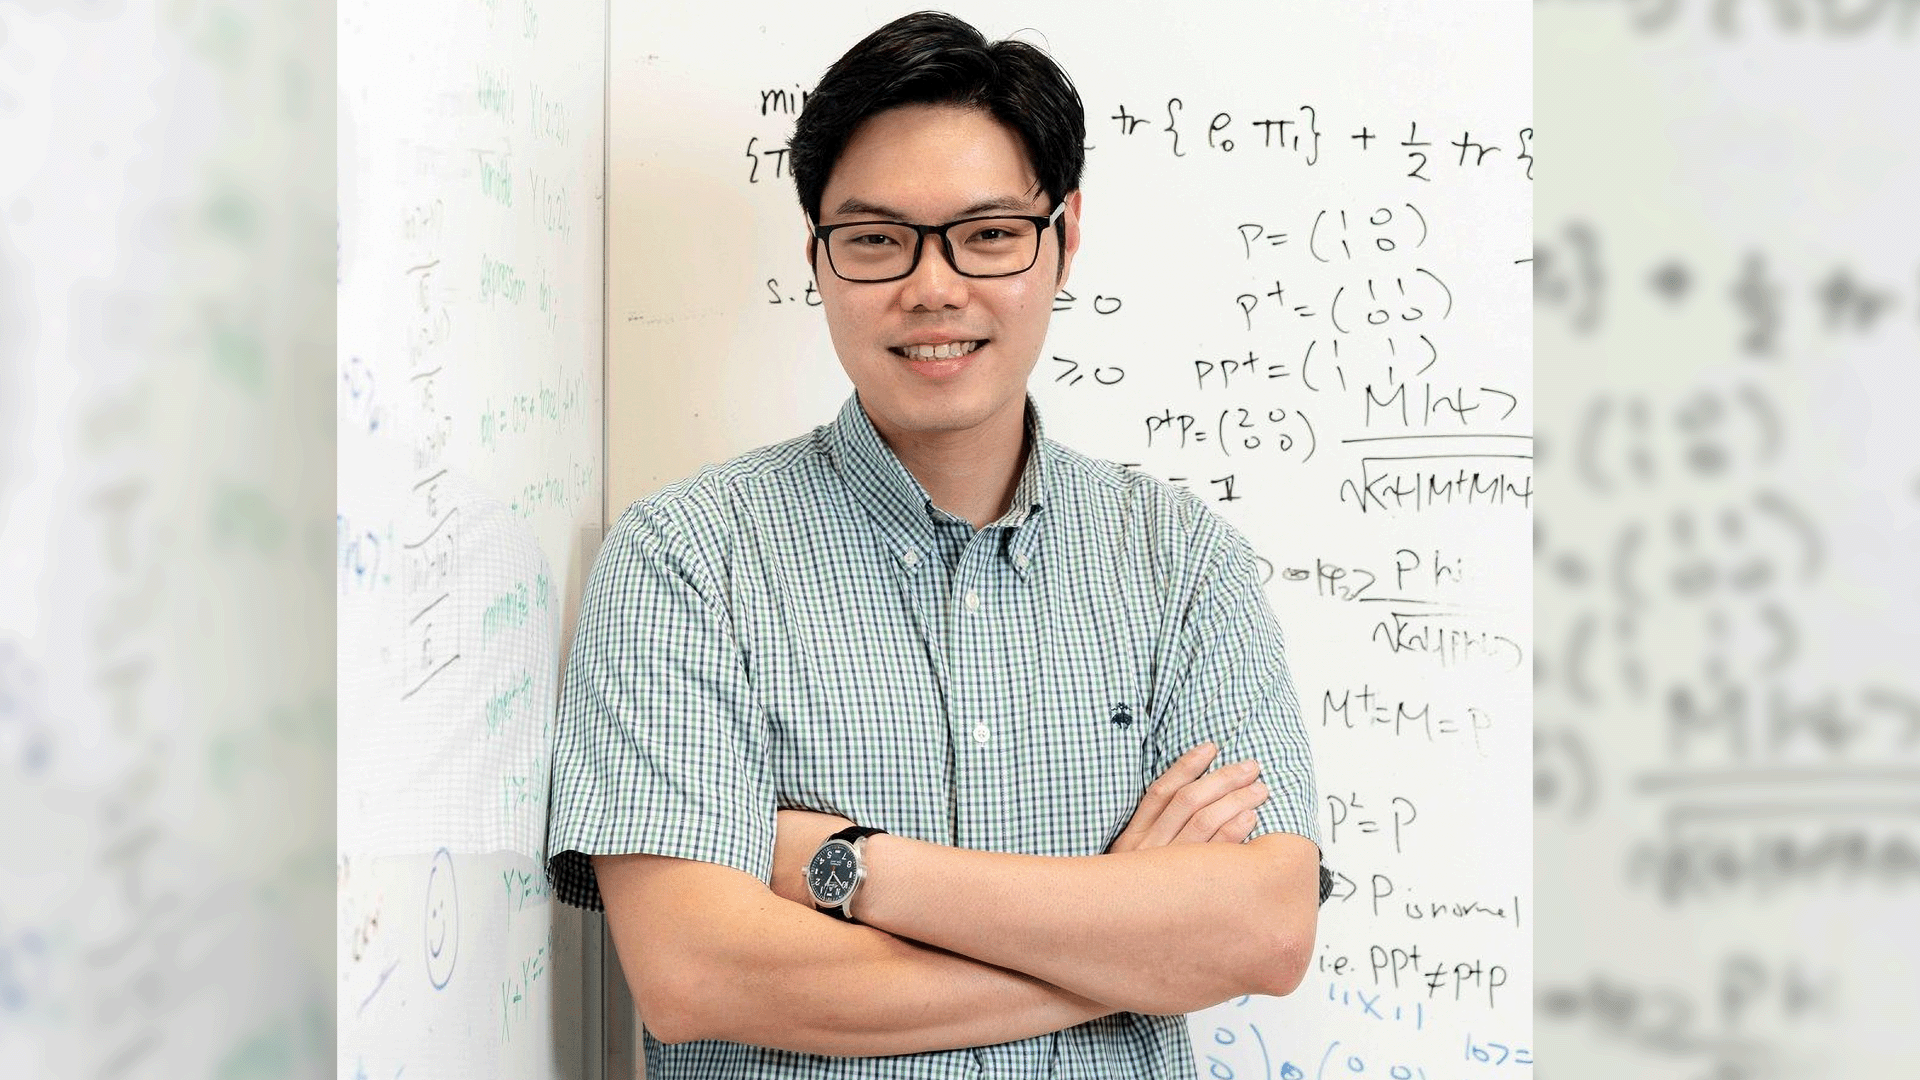 Dr Charles Lim is a recognised global expert in next-generation quantum-resistant communication networks.